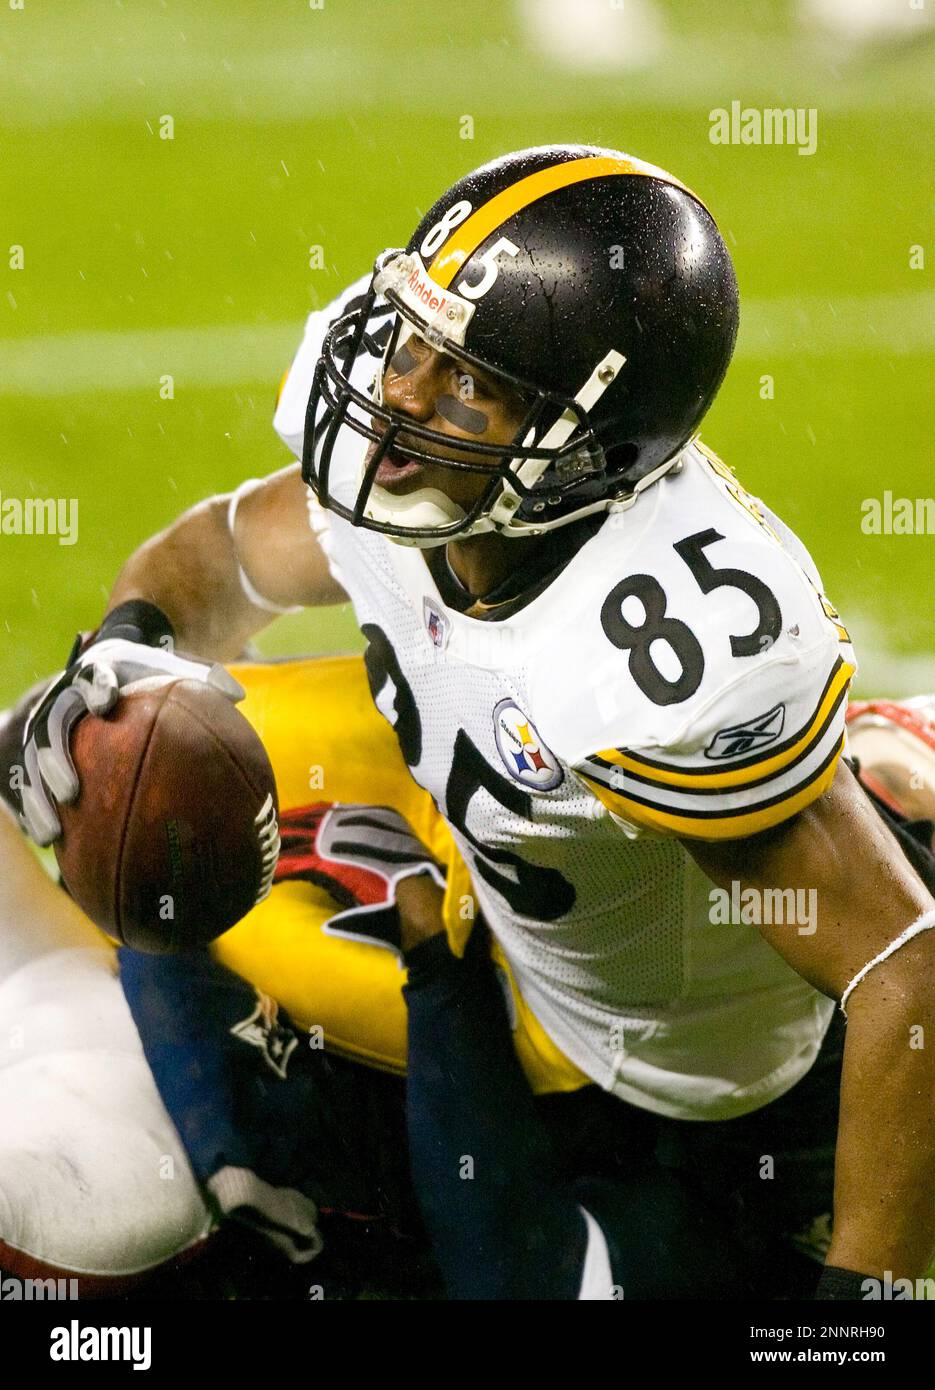 30 November 2008. Steeler Wide Receiver Nate Washington (85) gets up  following a second quarter pass reception. The Pittsburgh Steelers defeated  the New England Patriots 33 to 10 on a rain soaked